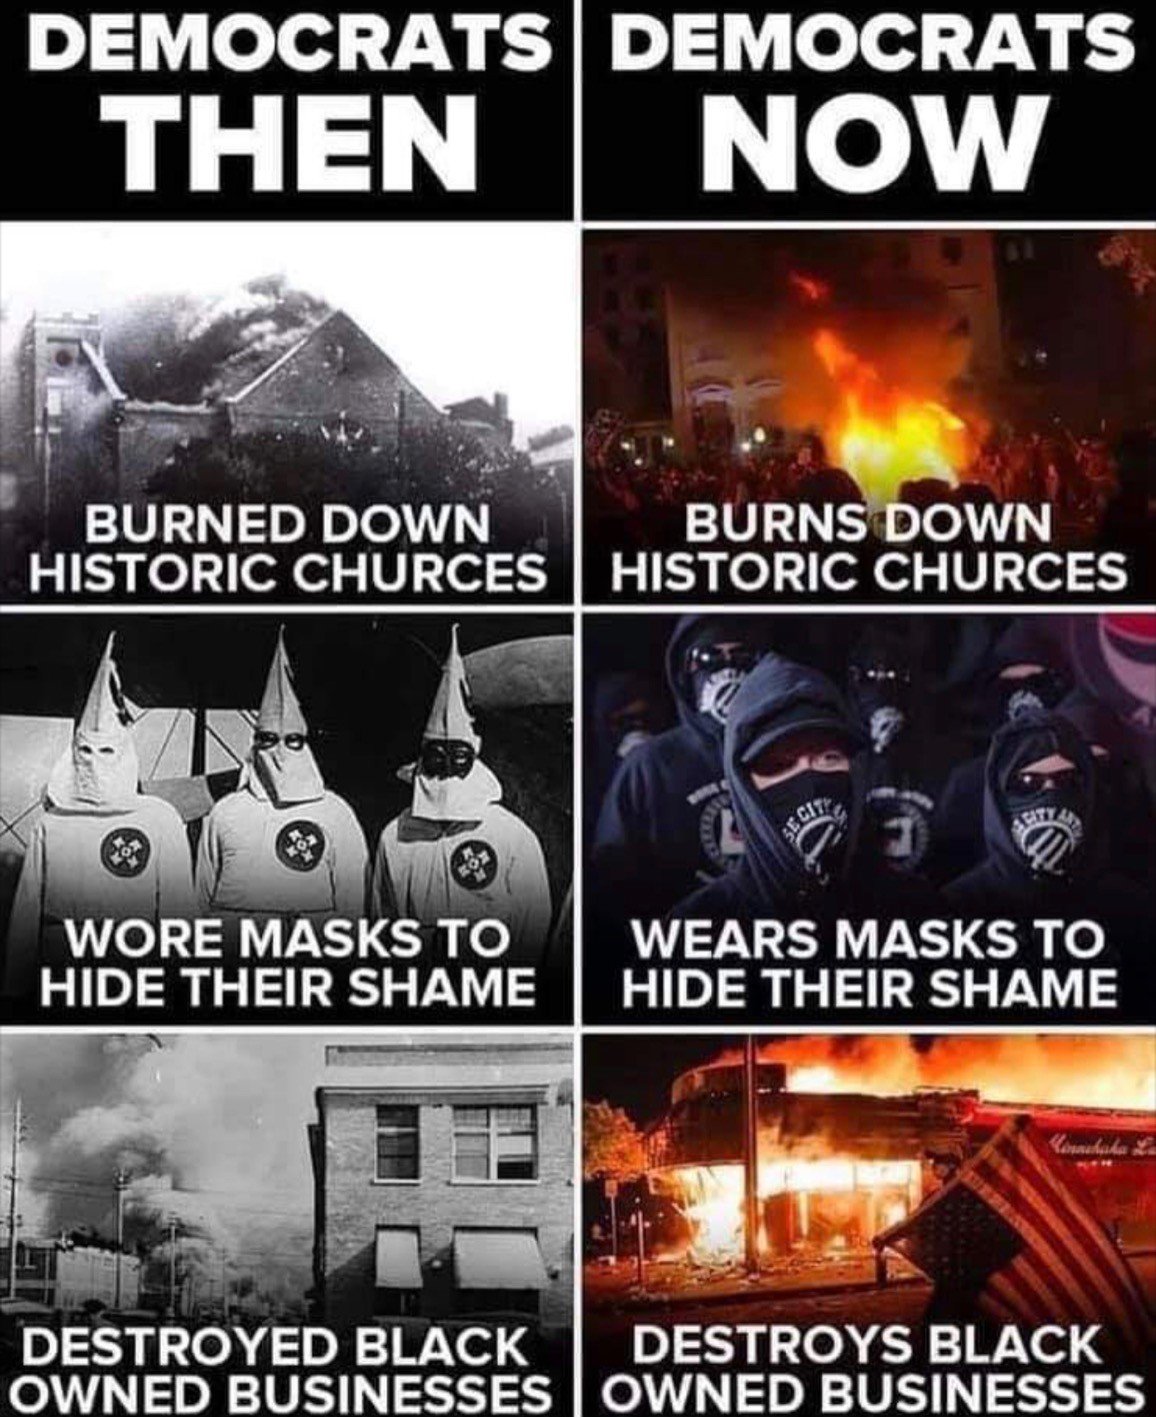 Democrats then and now